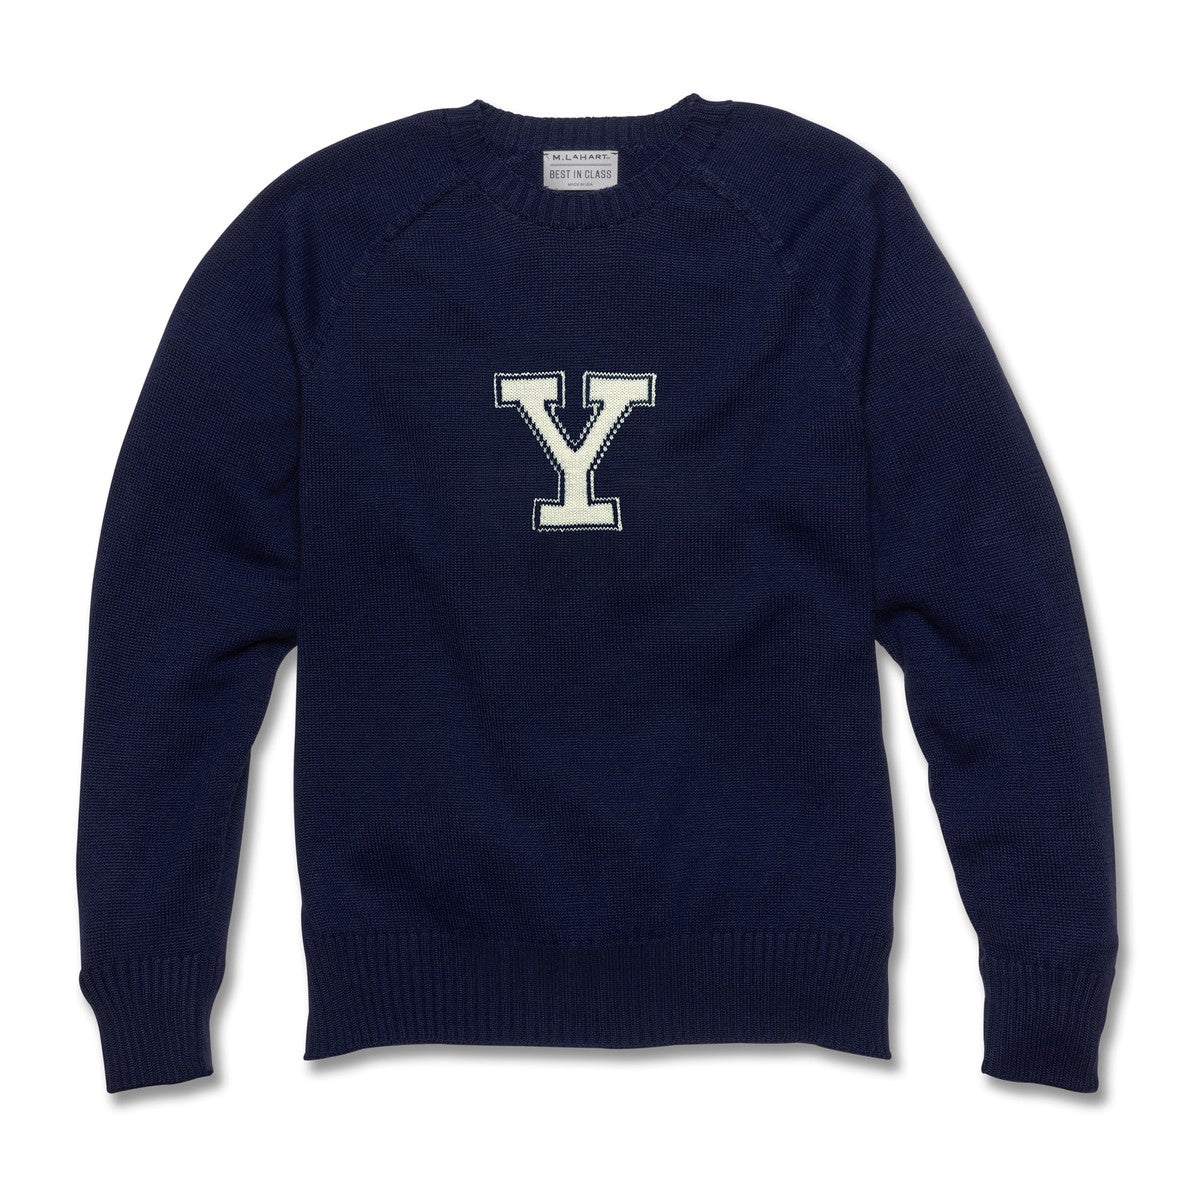 Yale Navy Blue and Ivory Letter Sweater | M.LaHart & Co.